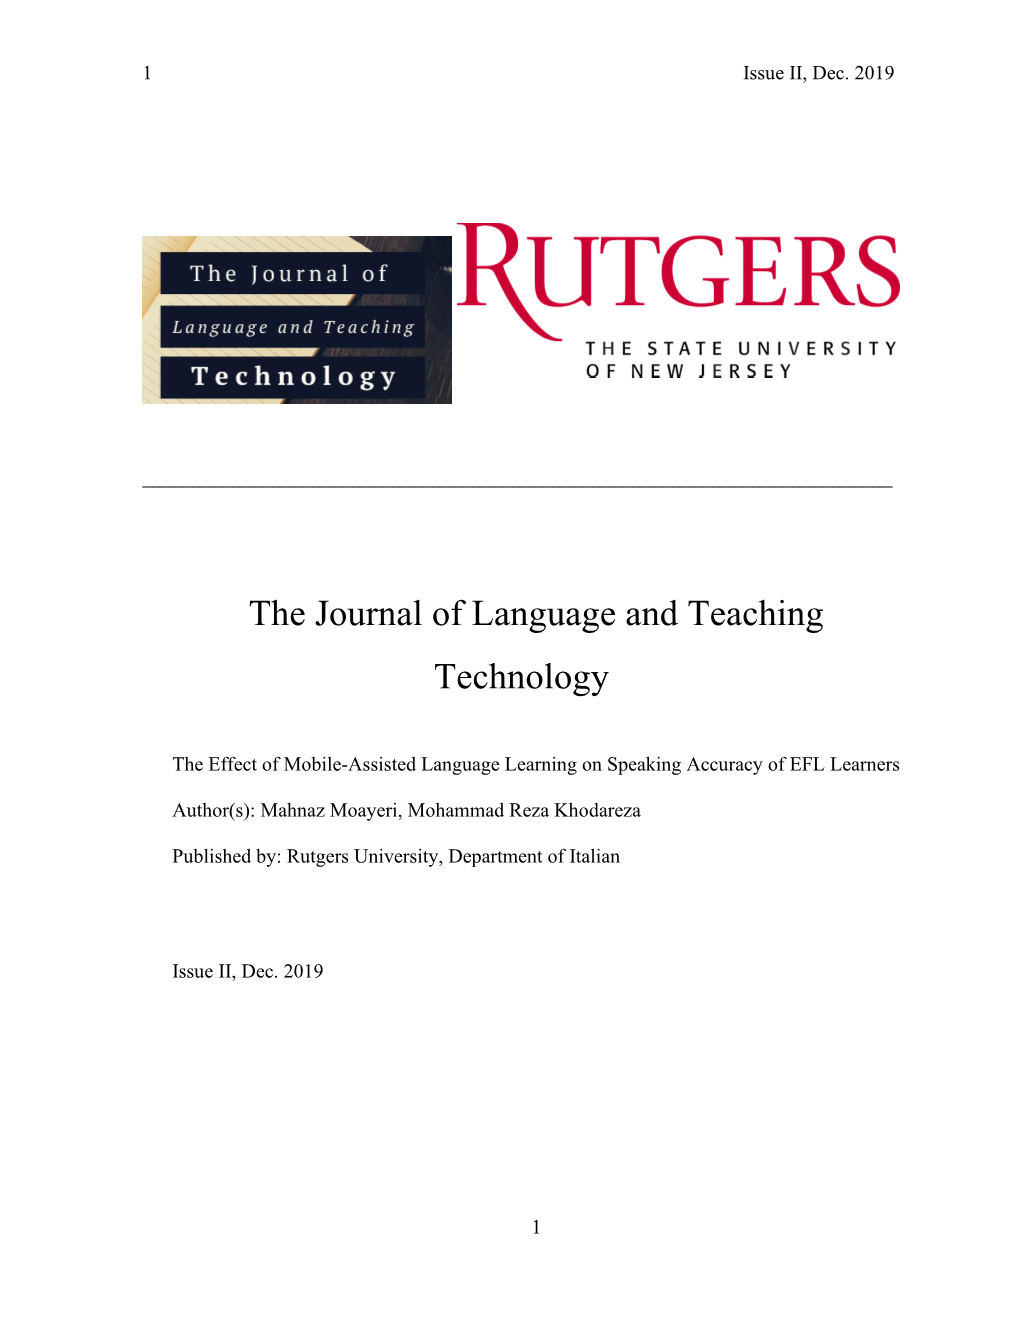 The Journal of Language and Teaching Technology